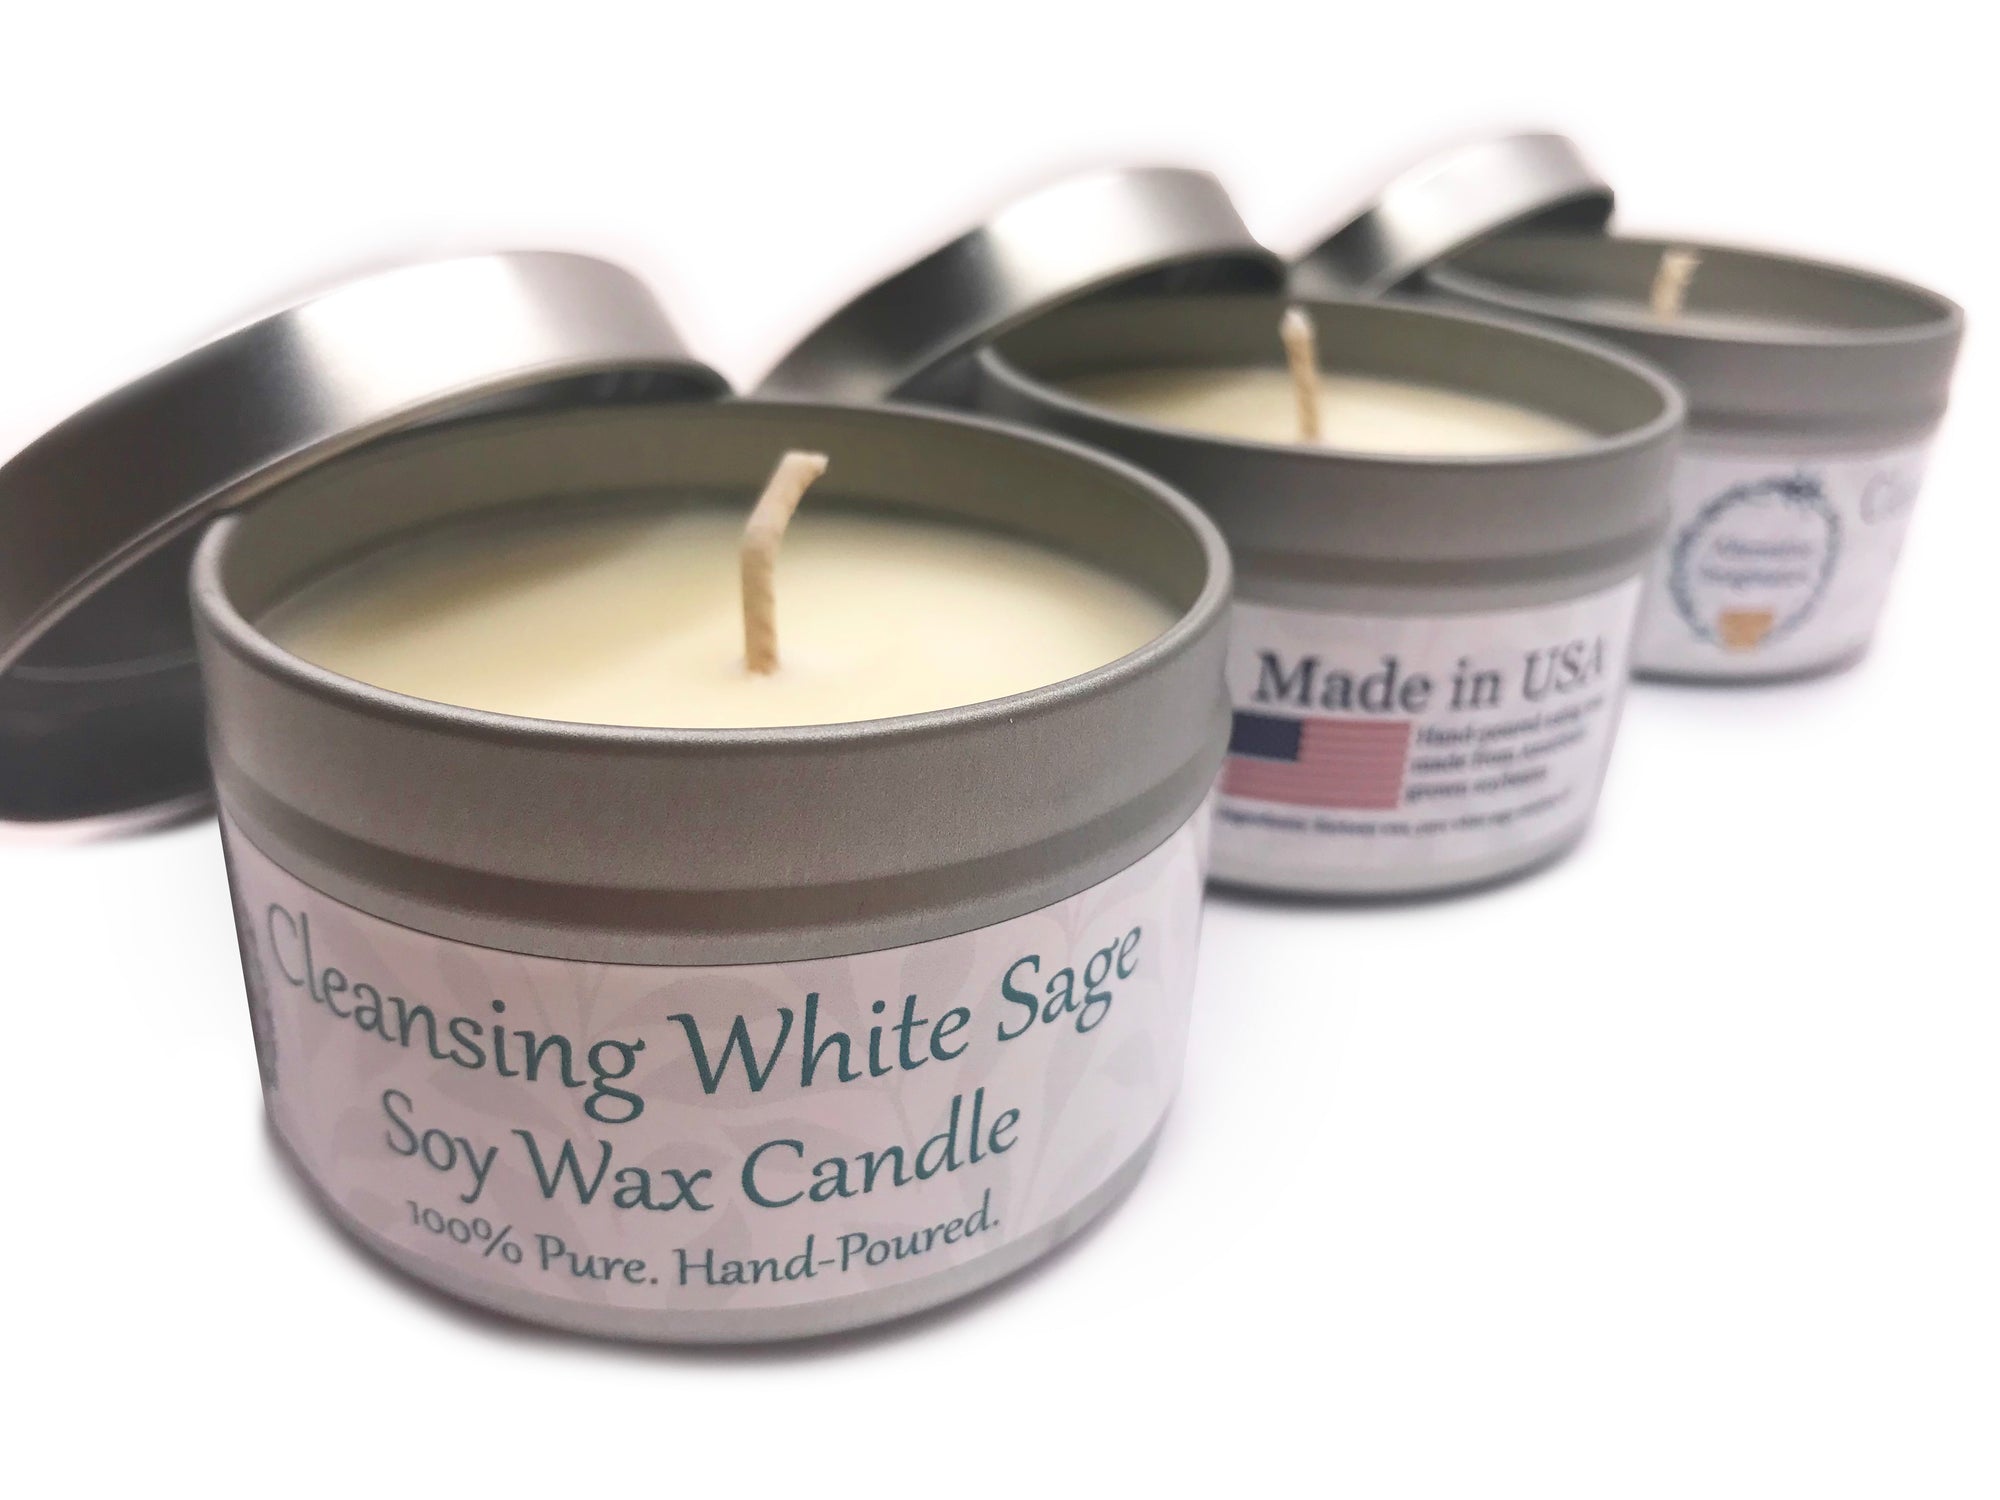 Cleansing White Sage Soy Candles - Pack of 3, 4 Ounce Candles